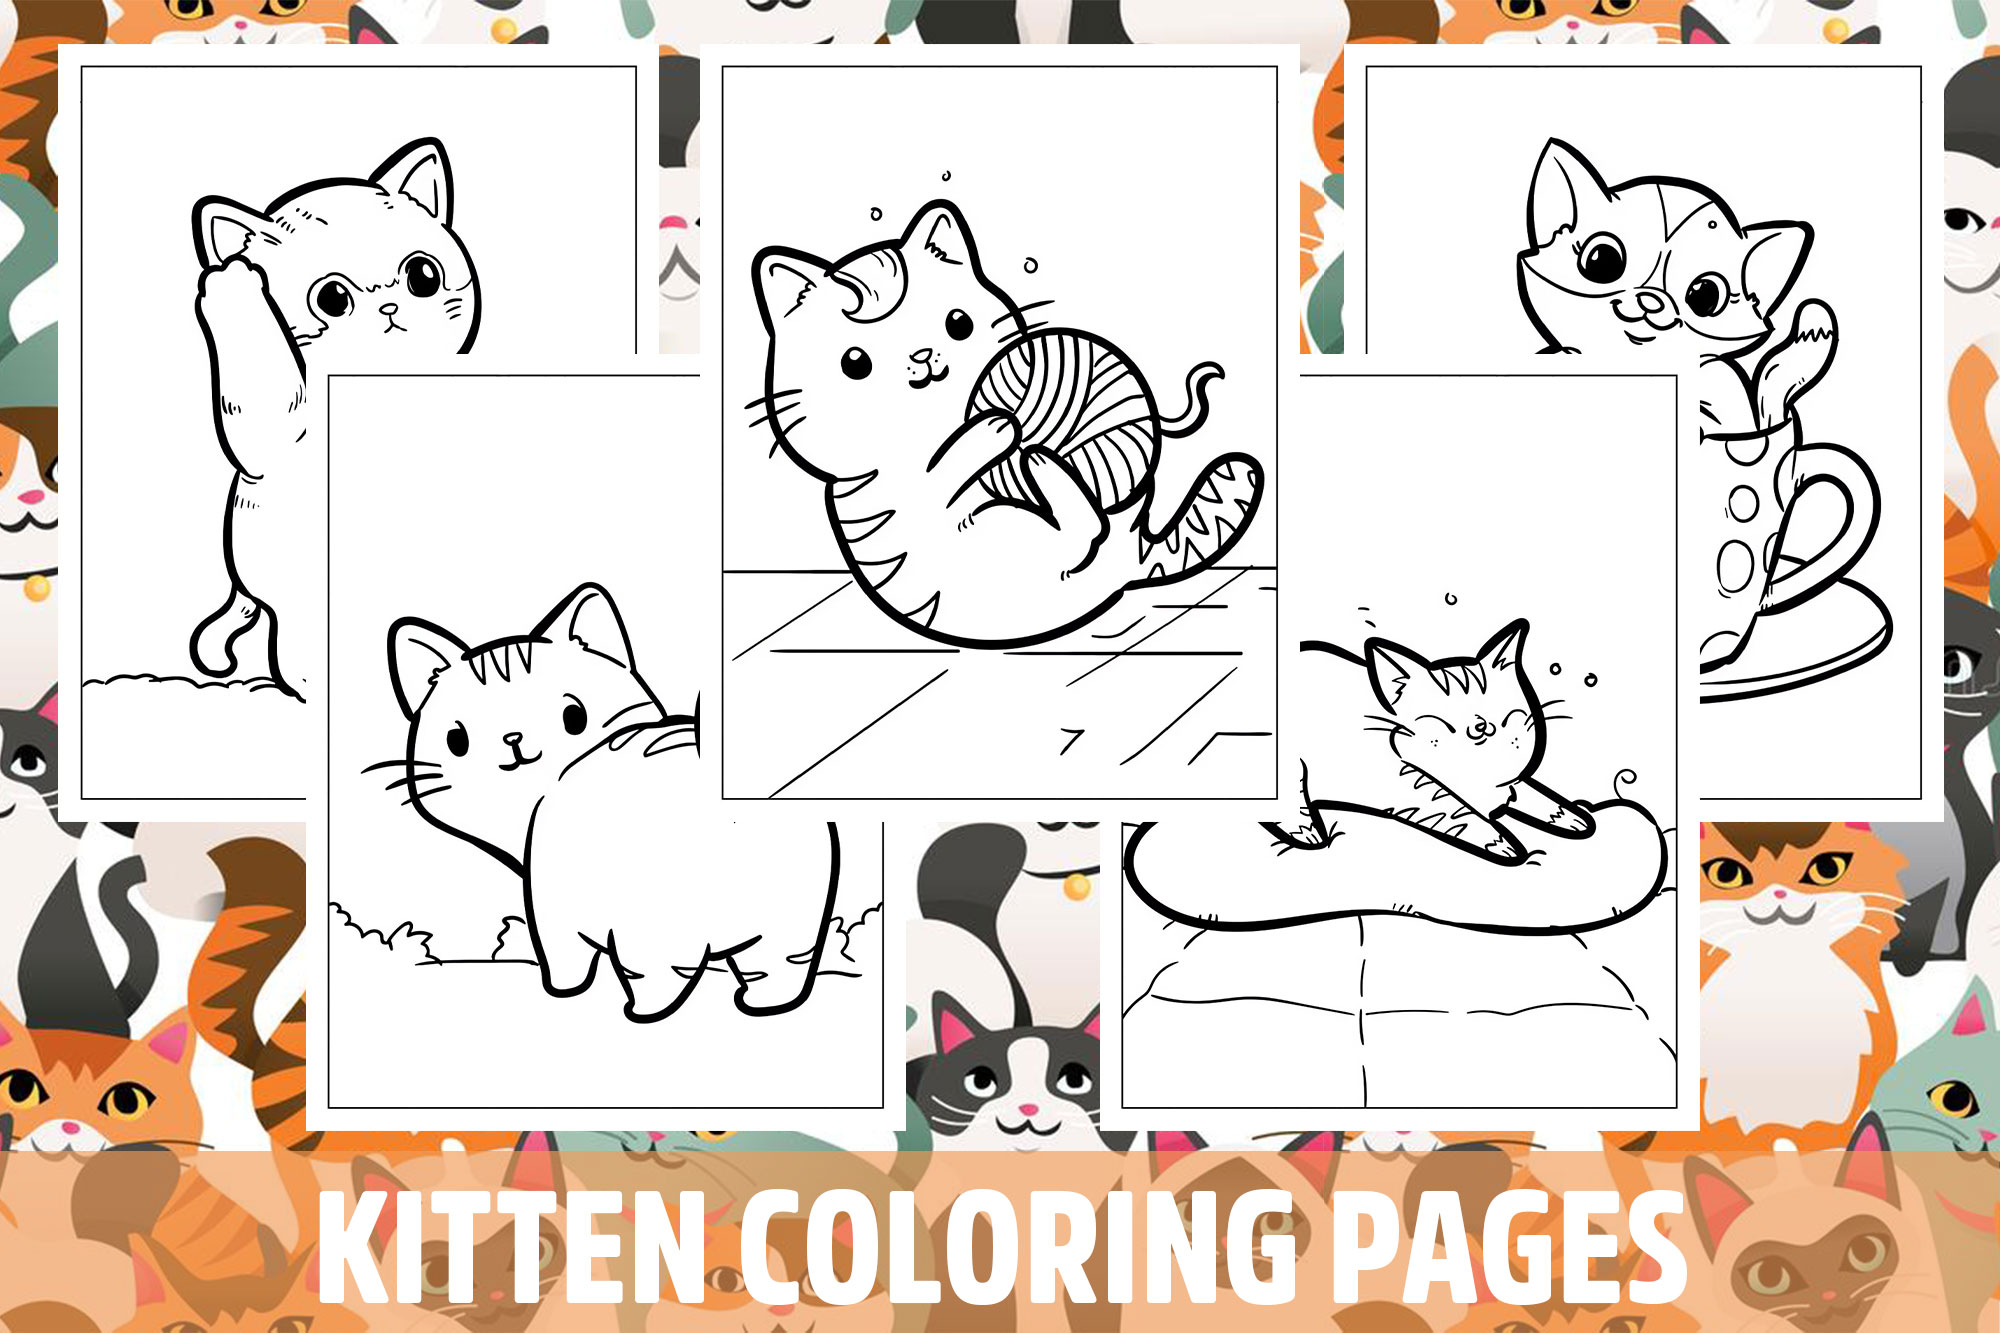 Kitten coloring pages for kids girls boys teens birthday school activity made by teachers